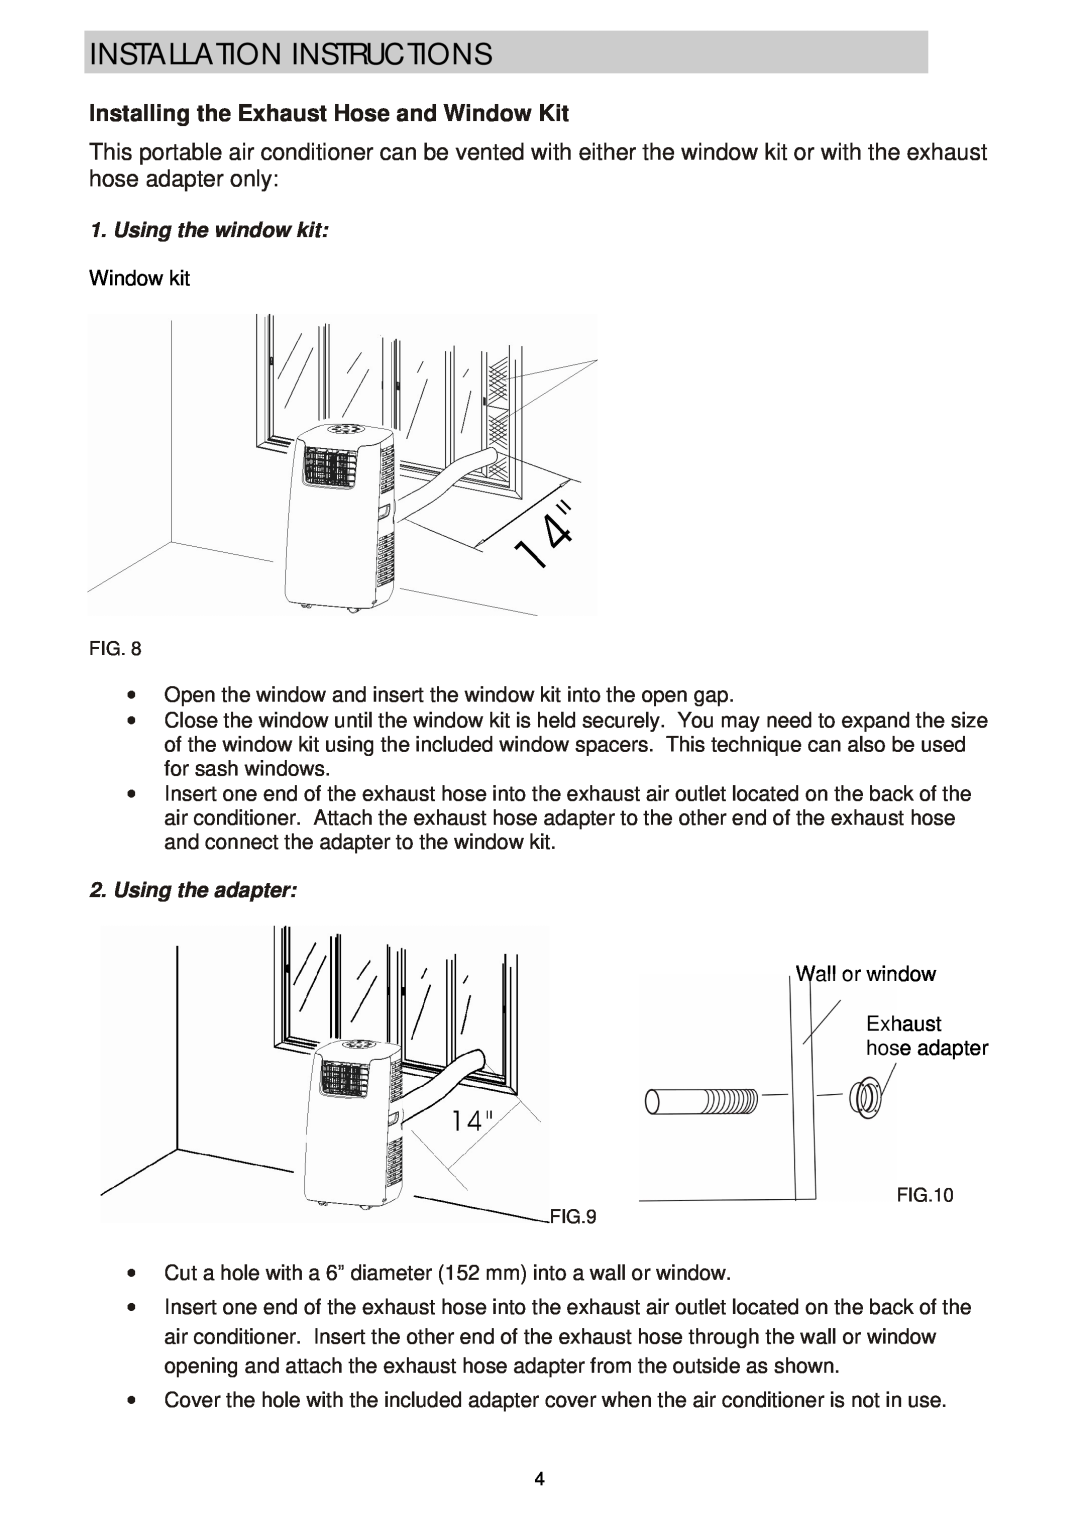 NewAir AC-14100E, AC-14100H Installation Instructions, Installing the Exhaust Hose and Window Kit, Using the window kit 